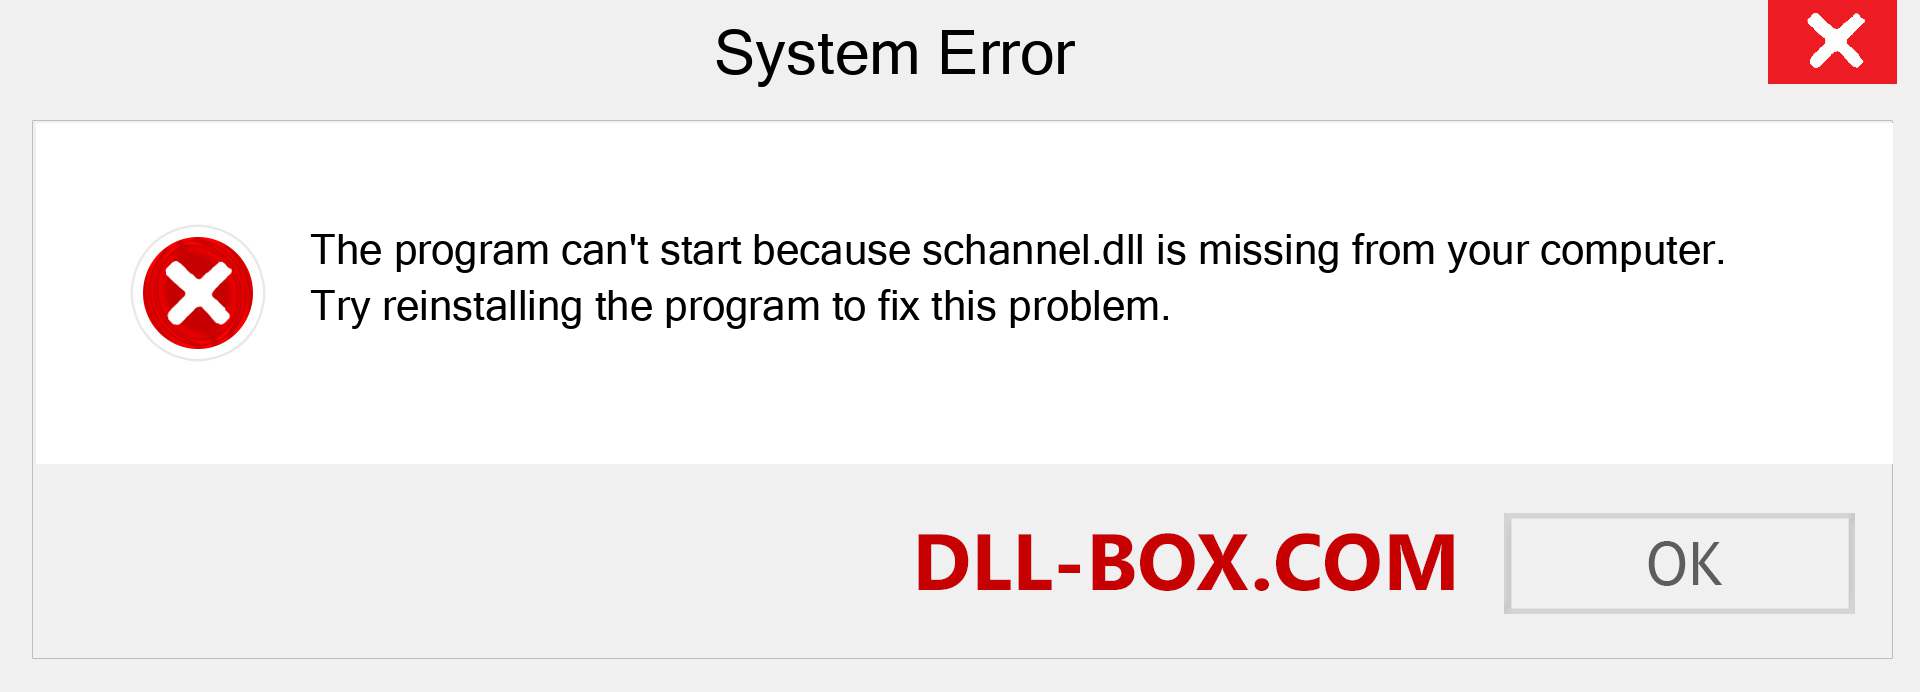  schannel.dll file is missing?. Download for Windows 7, 8, 10 - Fix  schannel dll Missing Error on Windows, photos, images